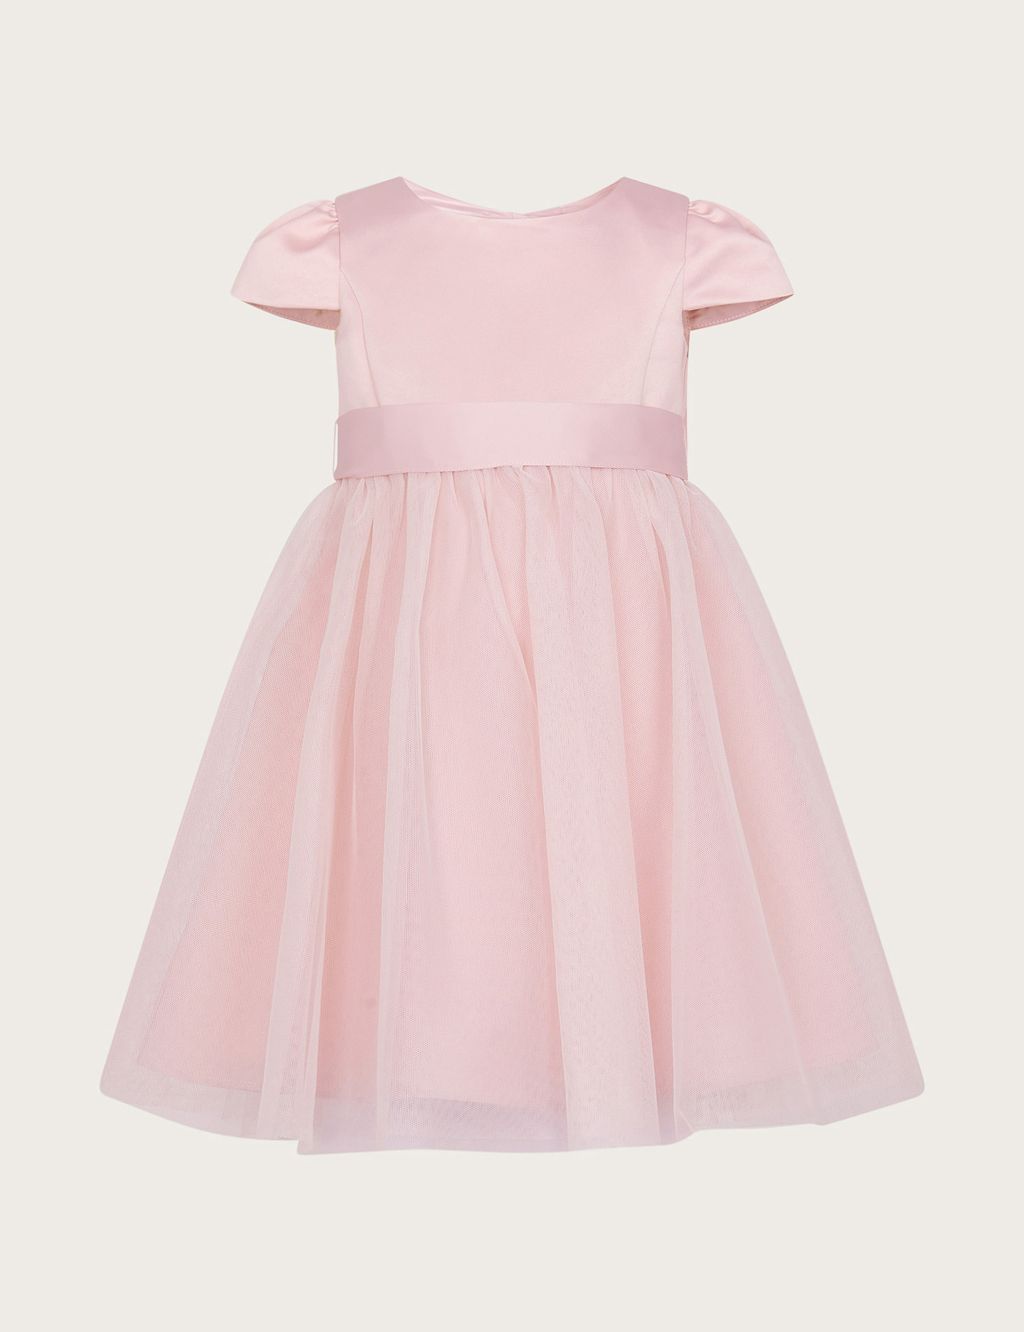 Satin Tulle Occasion Dress (1-3 Yrs) image 1